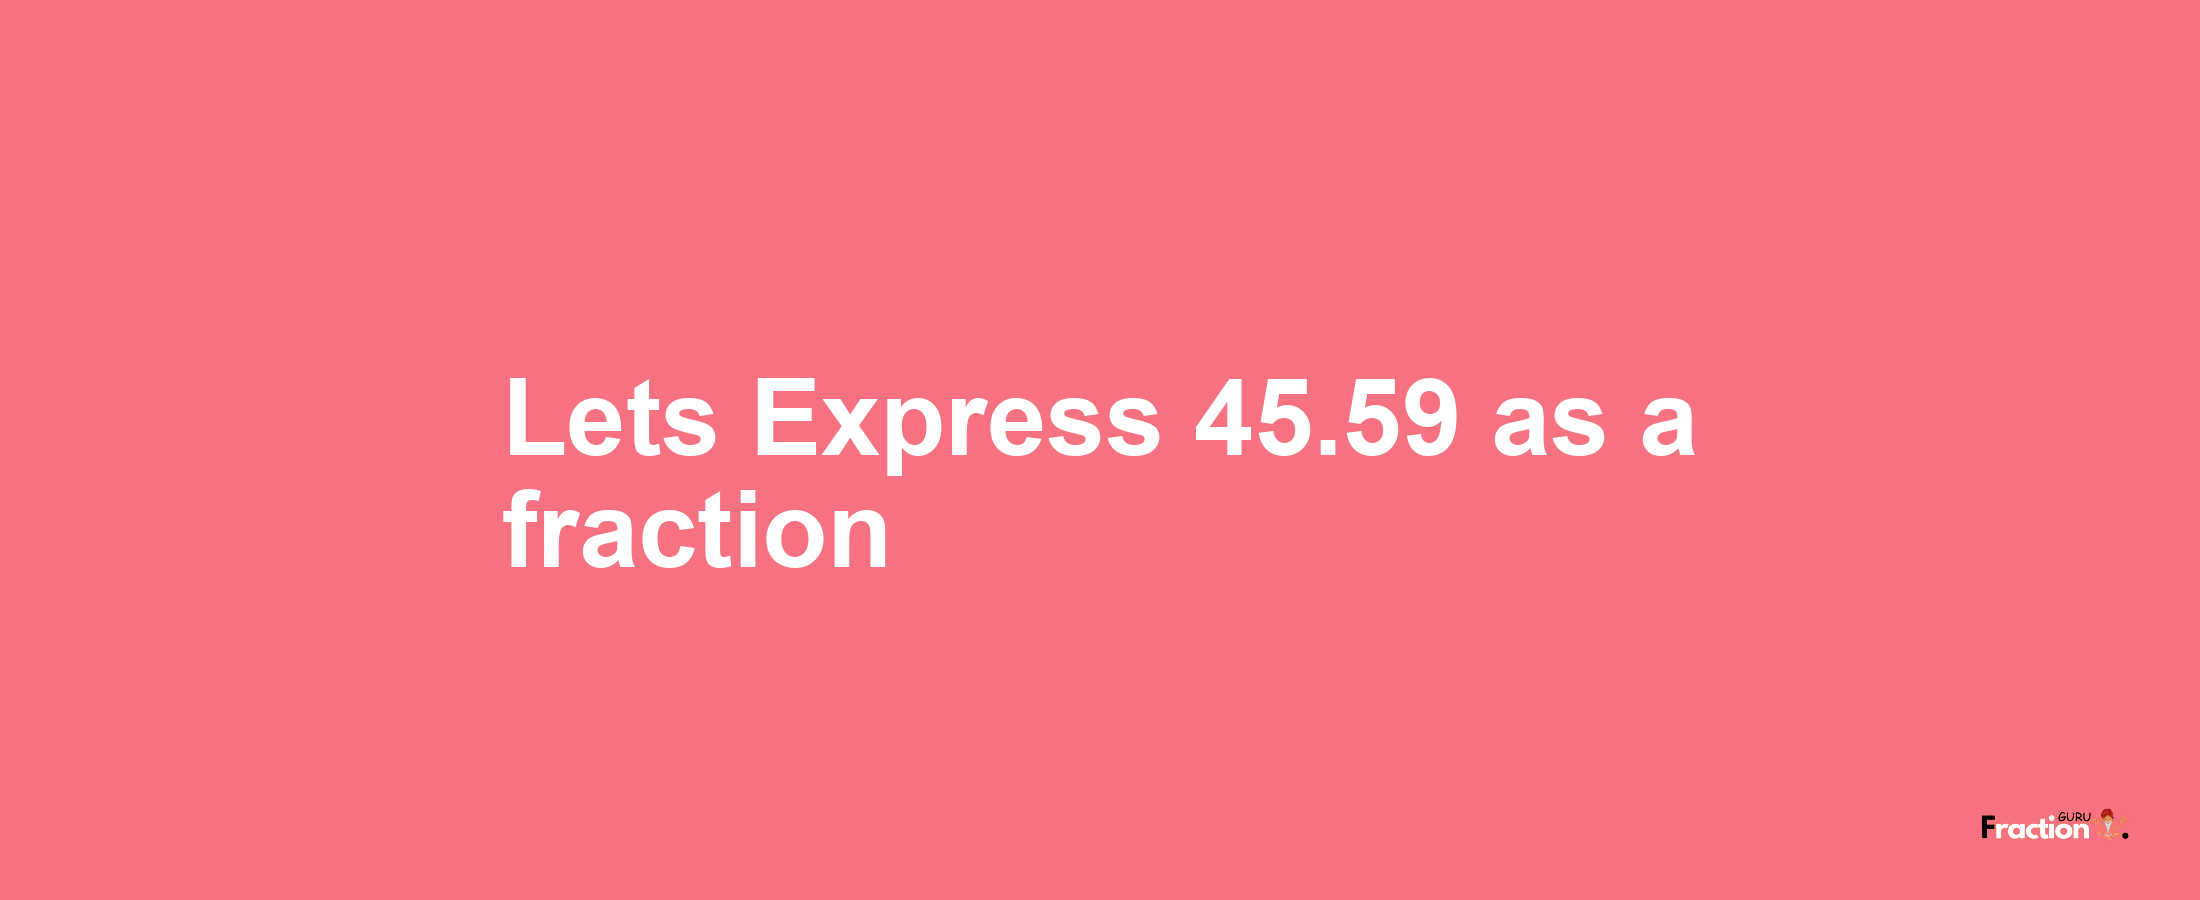 Lets Express 45.59 as afraction